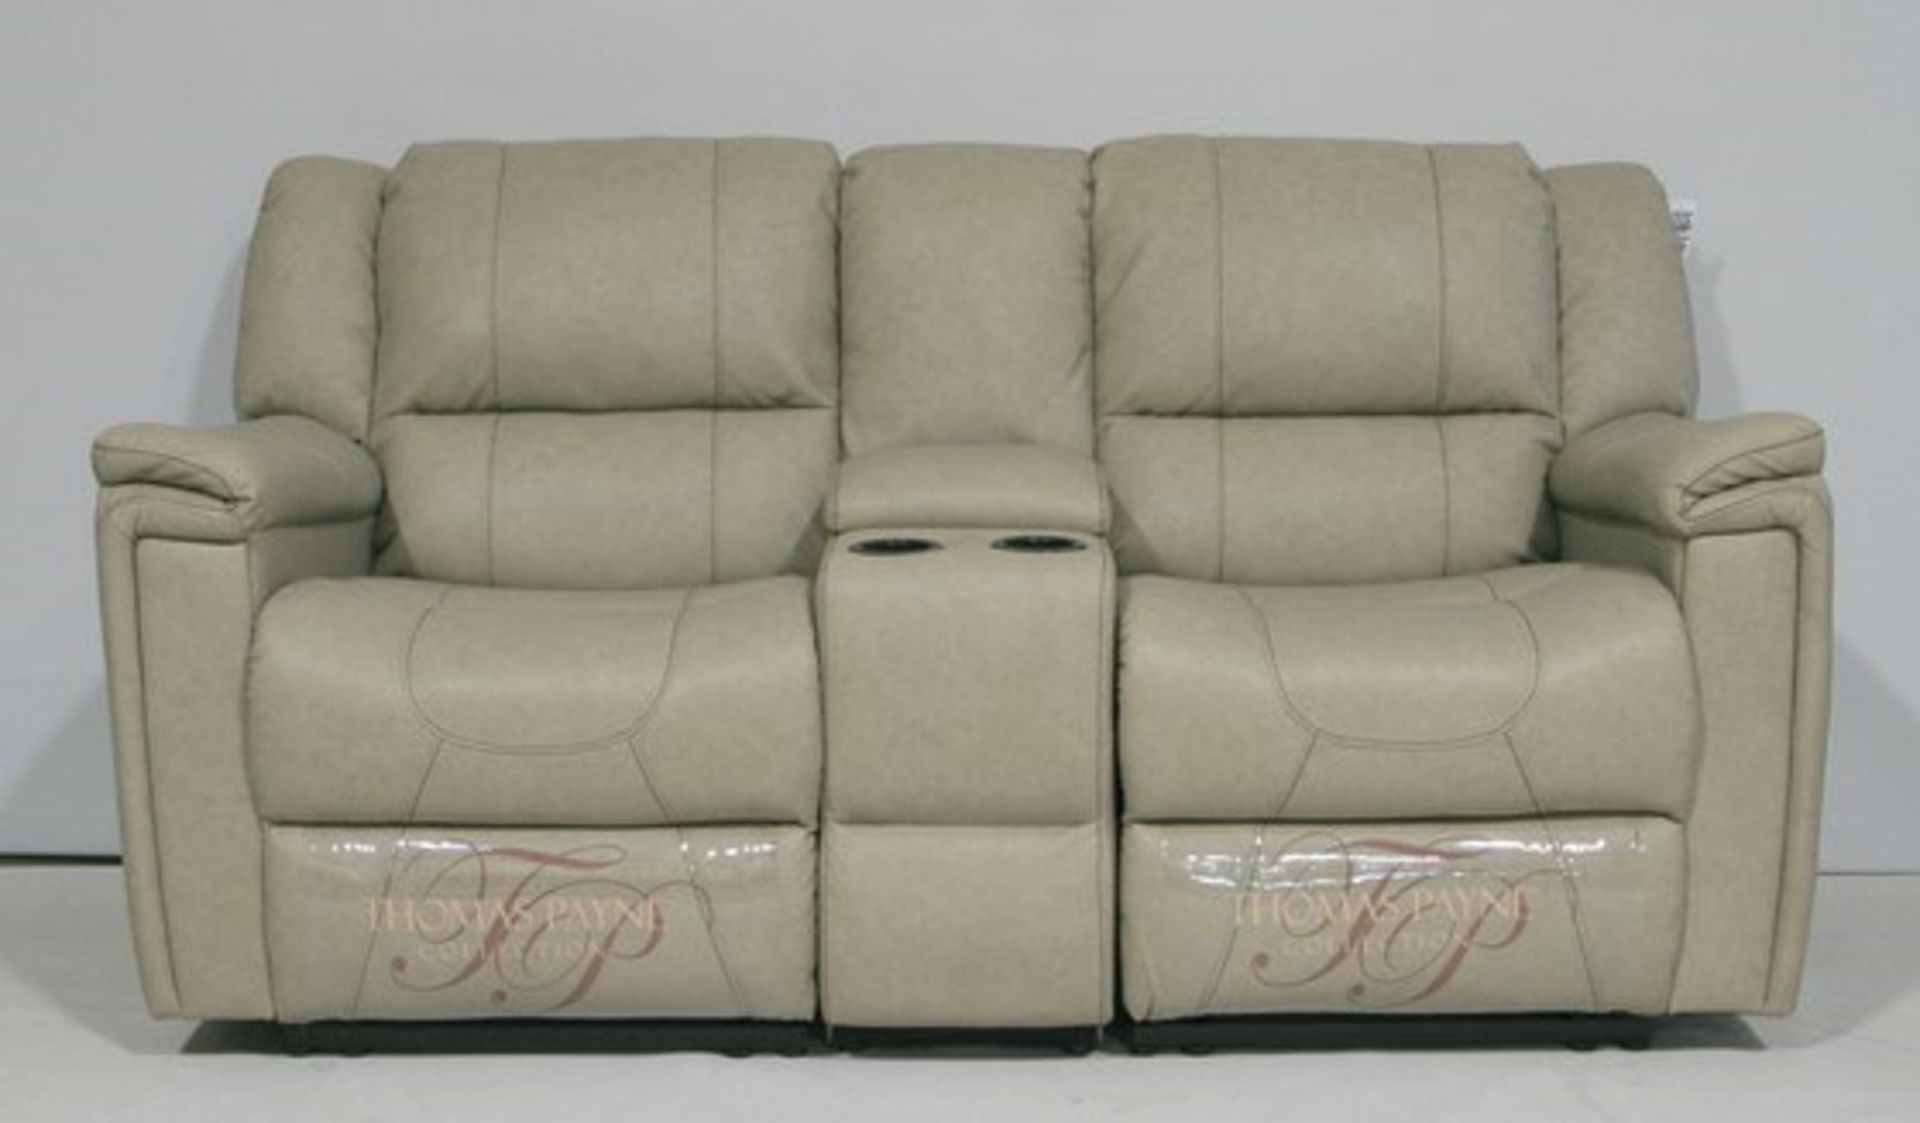 1 x Thomas Payne Reclining Wallhugger Theater Seating Love Seat Couch With Center Console and